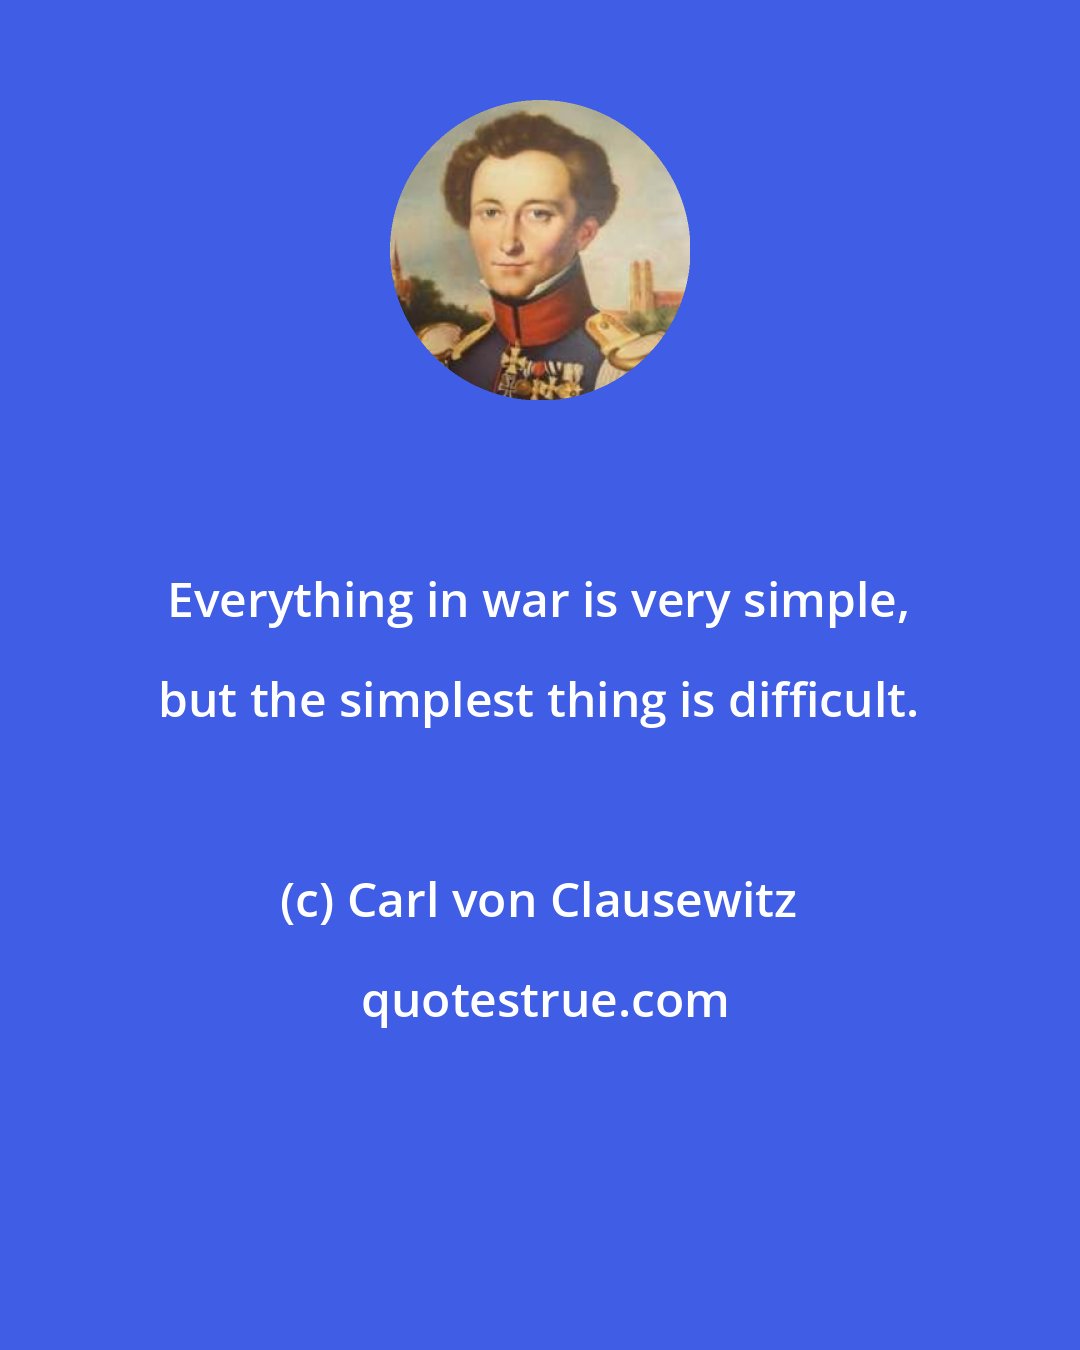 Carl von Clausewitz: Everything in war is very simple, but the simplest thing is difficult.